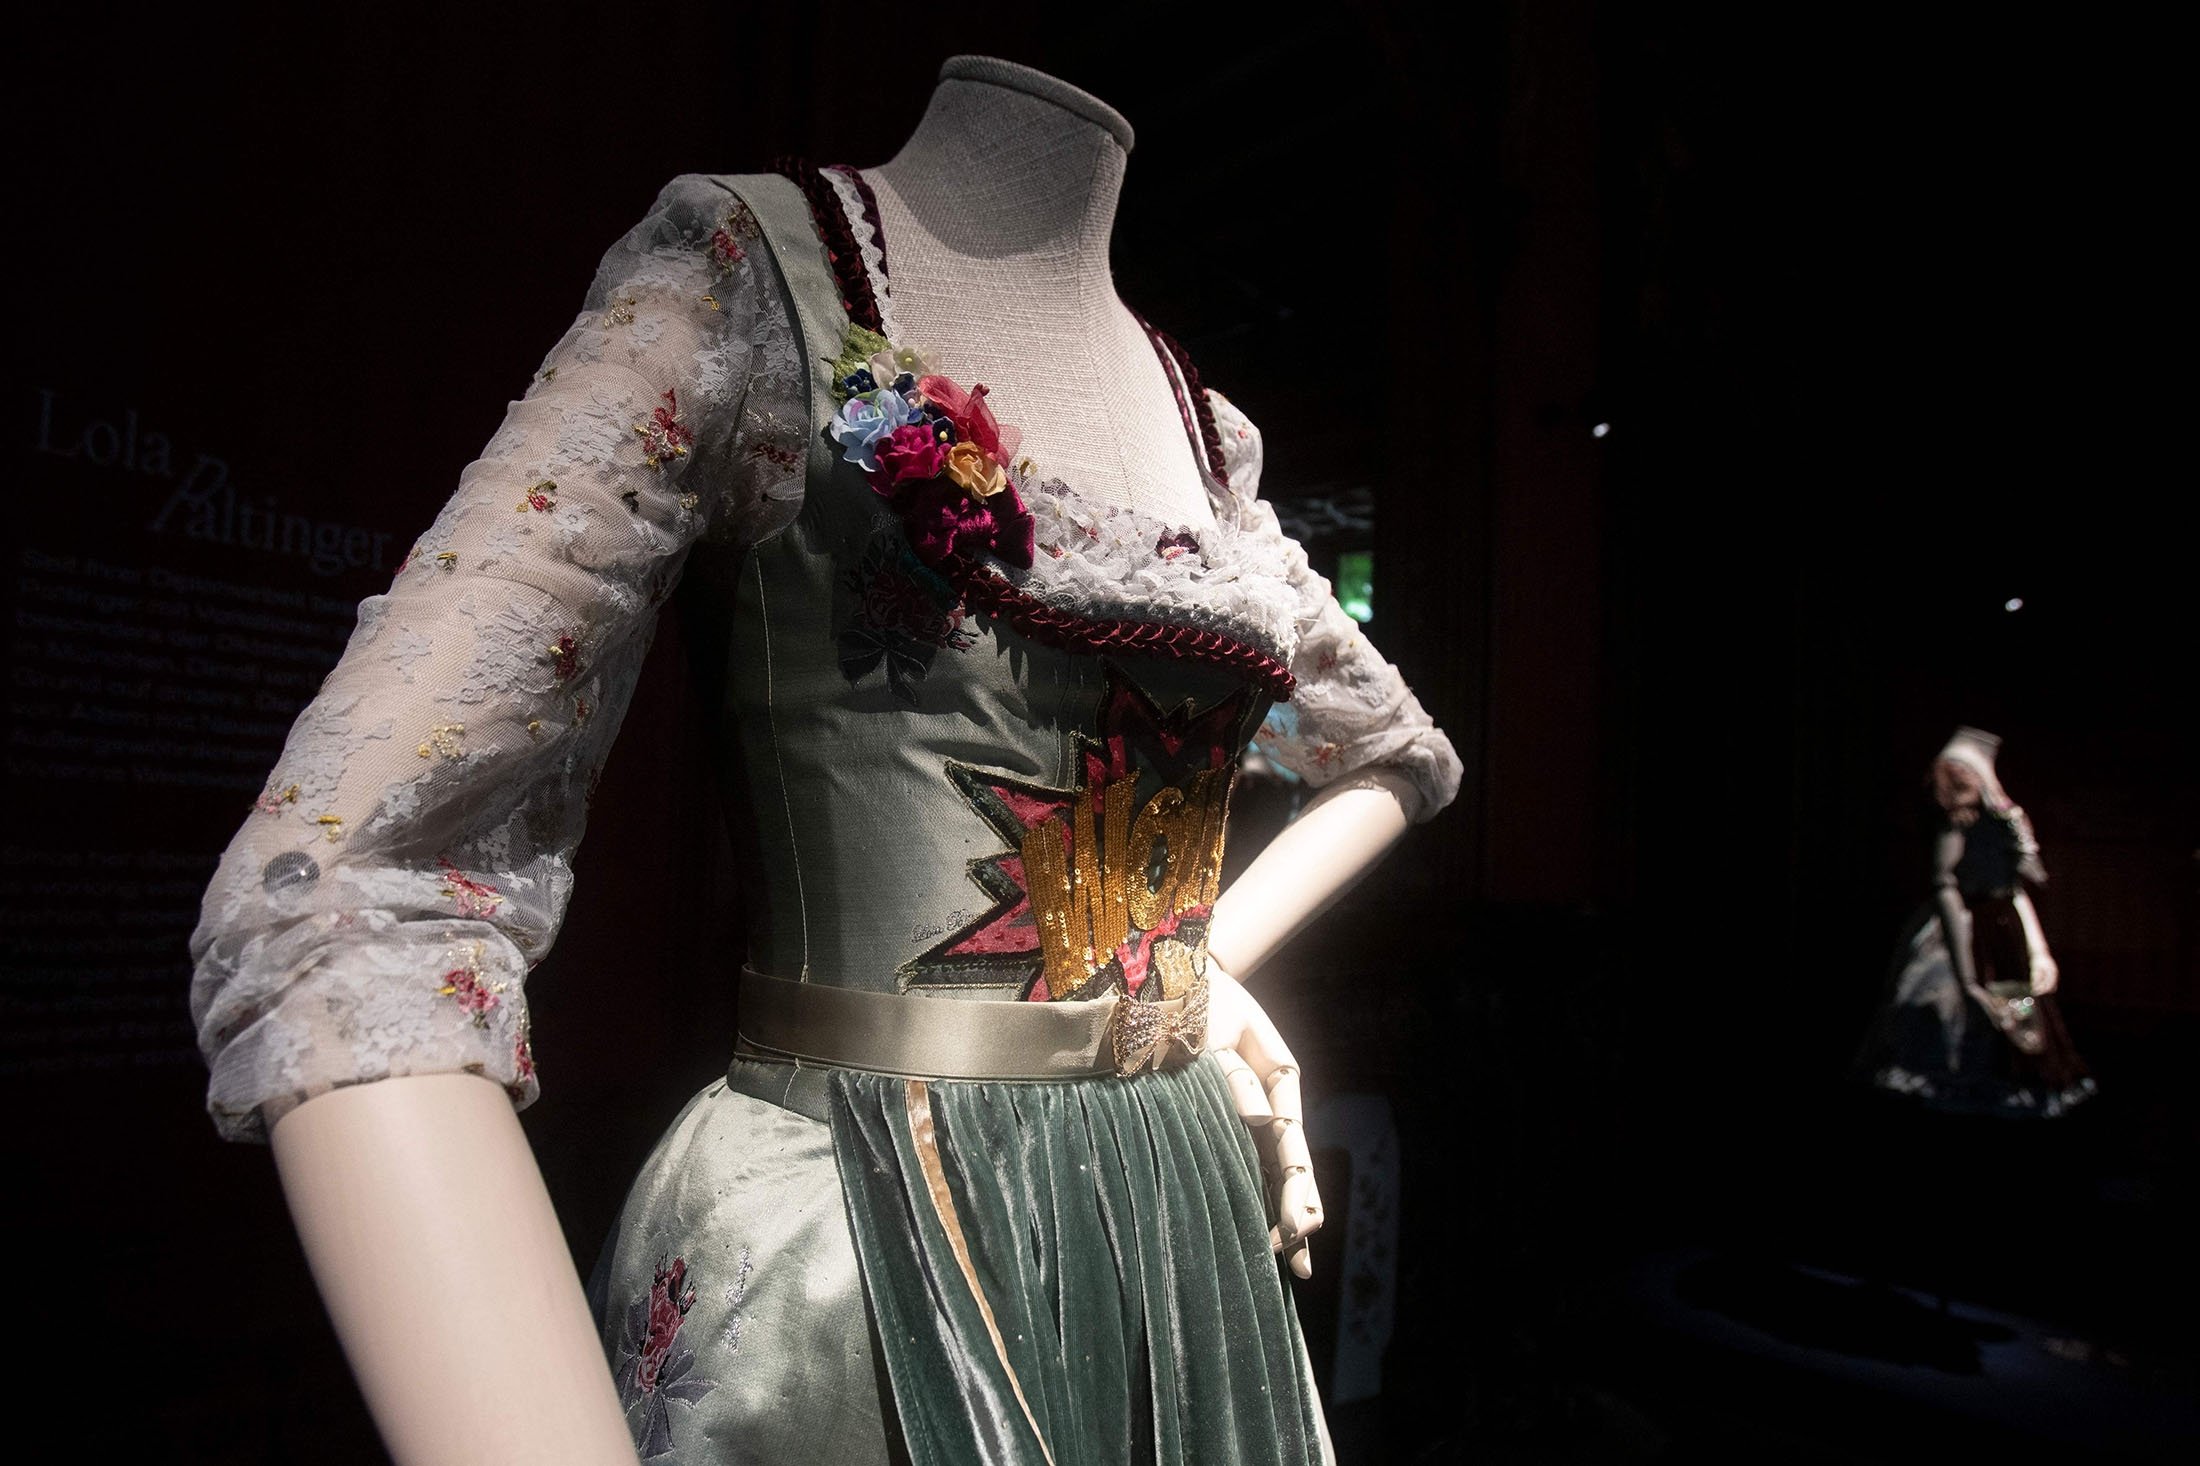 Dirndl dresses are on display at the exhibition "Dirndl – Tradition goes fashion" at the Mamorschloessl palace in Bad Ischl, Upper Austria, June 24, 2021. (AFP Photo)